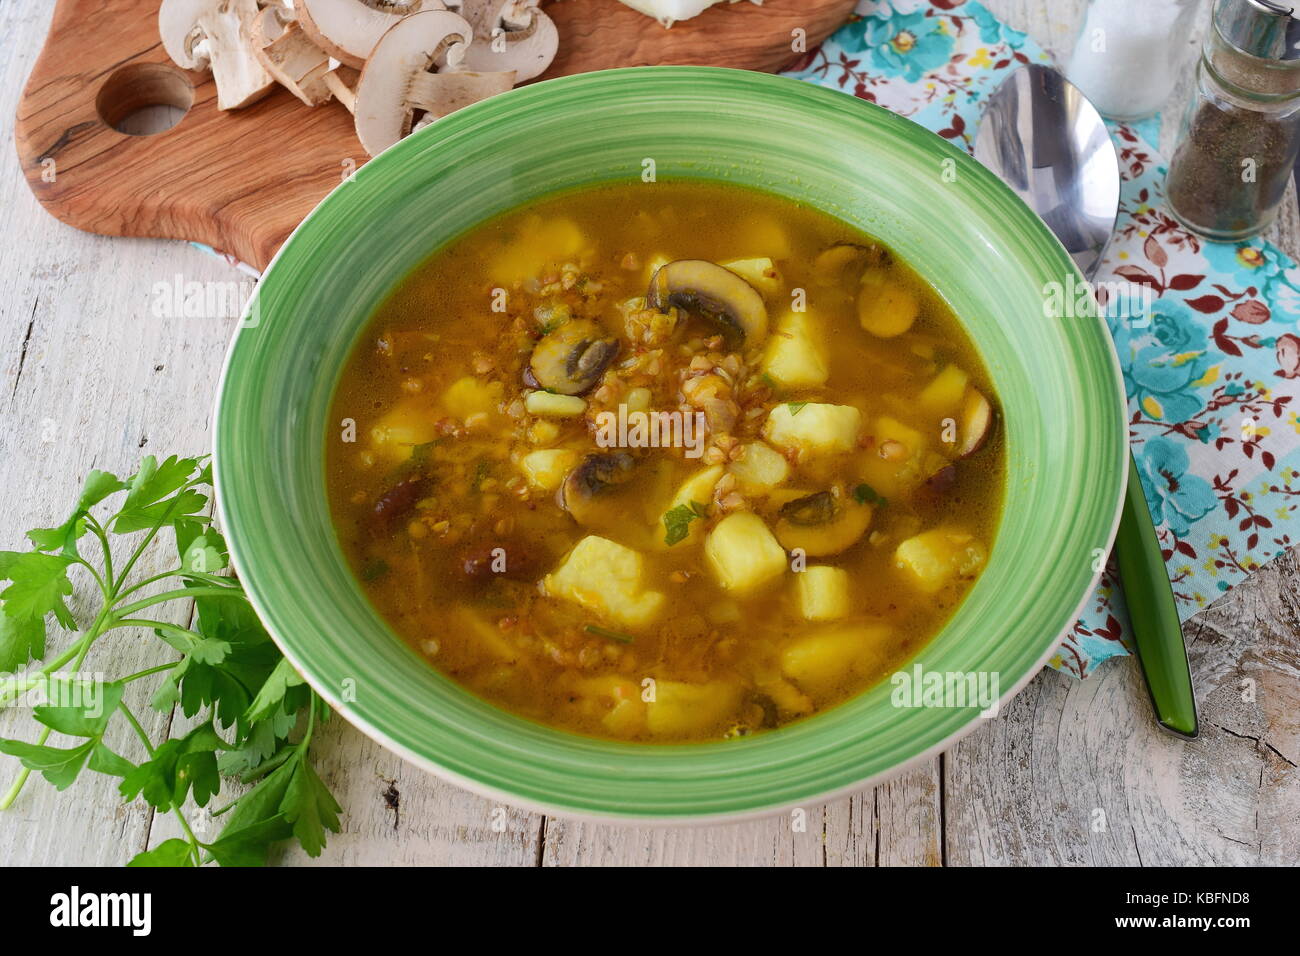 Healthy soup with buckwheat, potato, mushrooms, carrots and onion wit olive oil in a green bowl on a wooden background Stock Photo